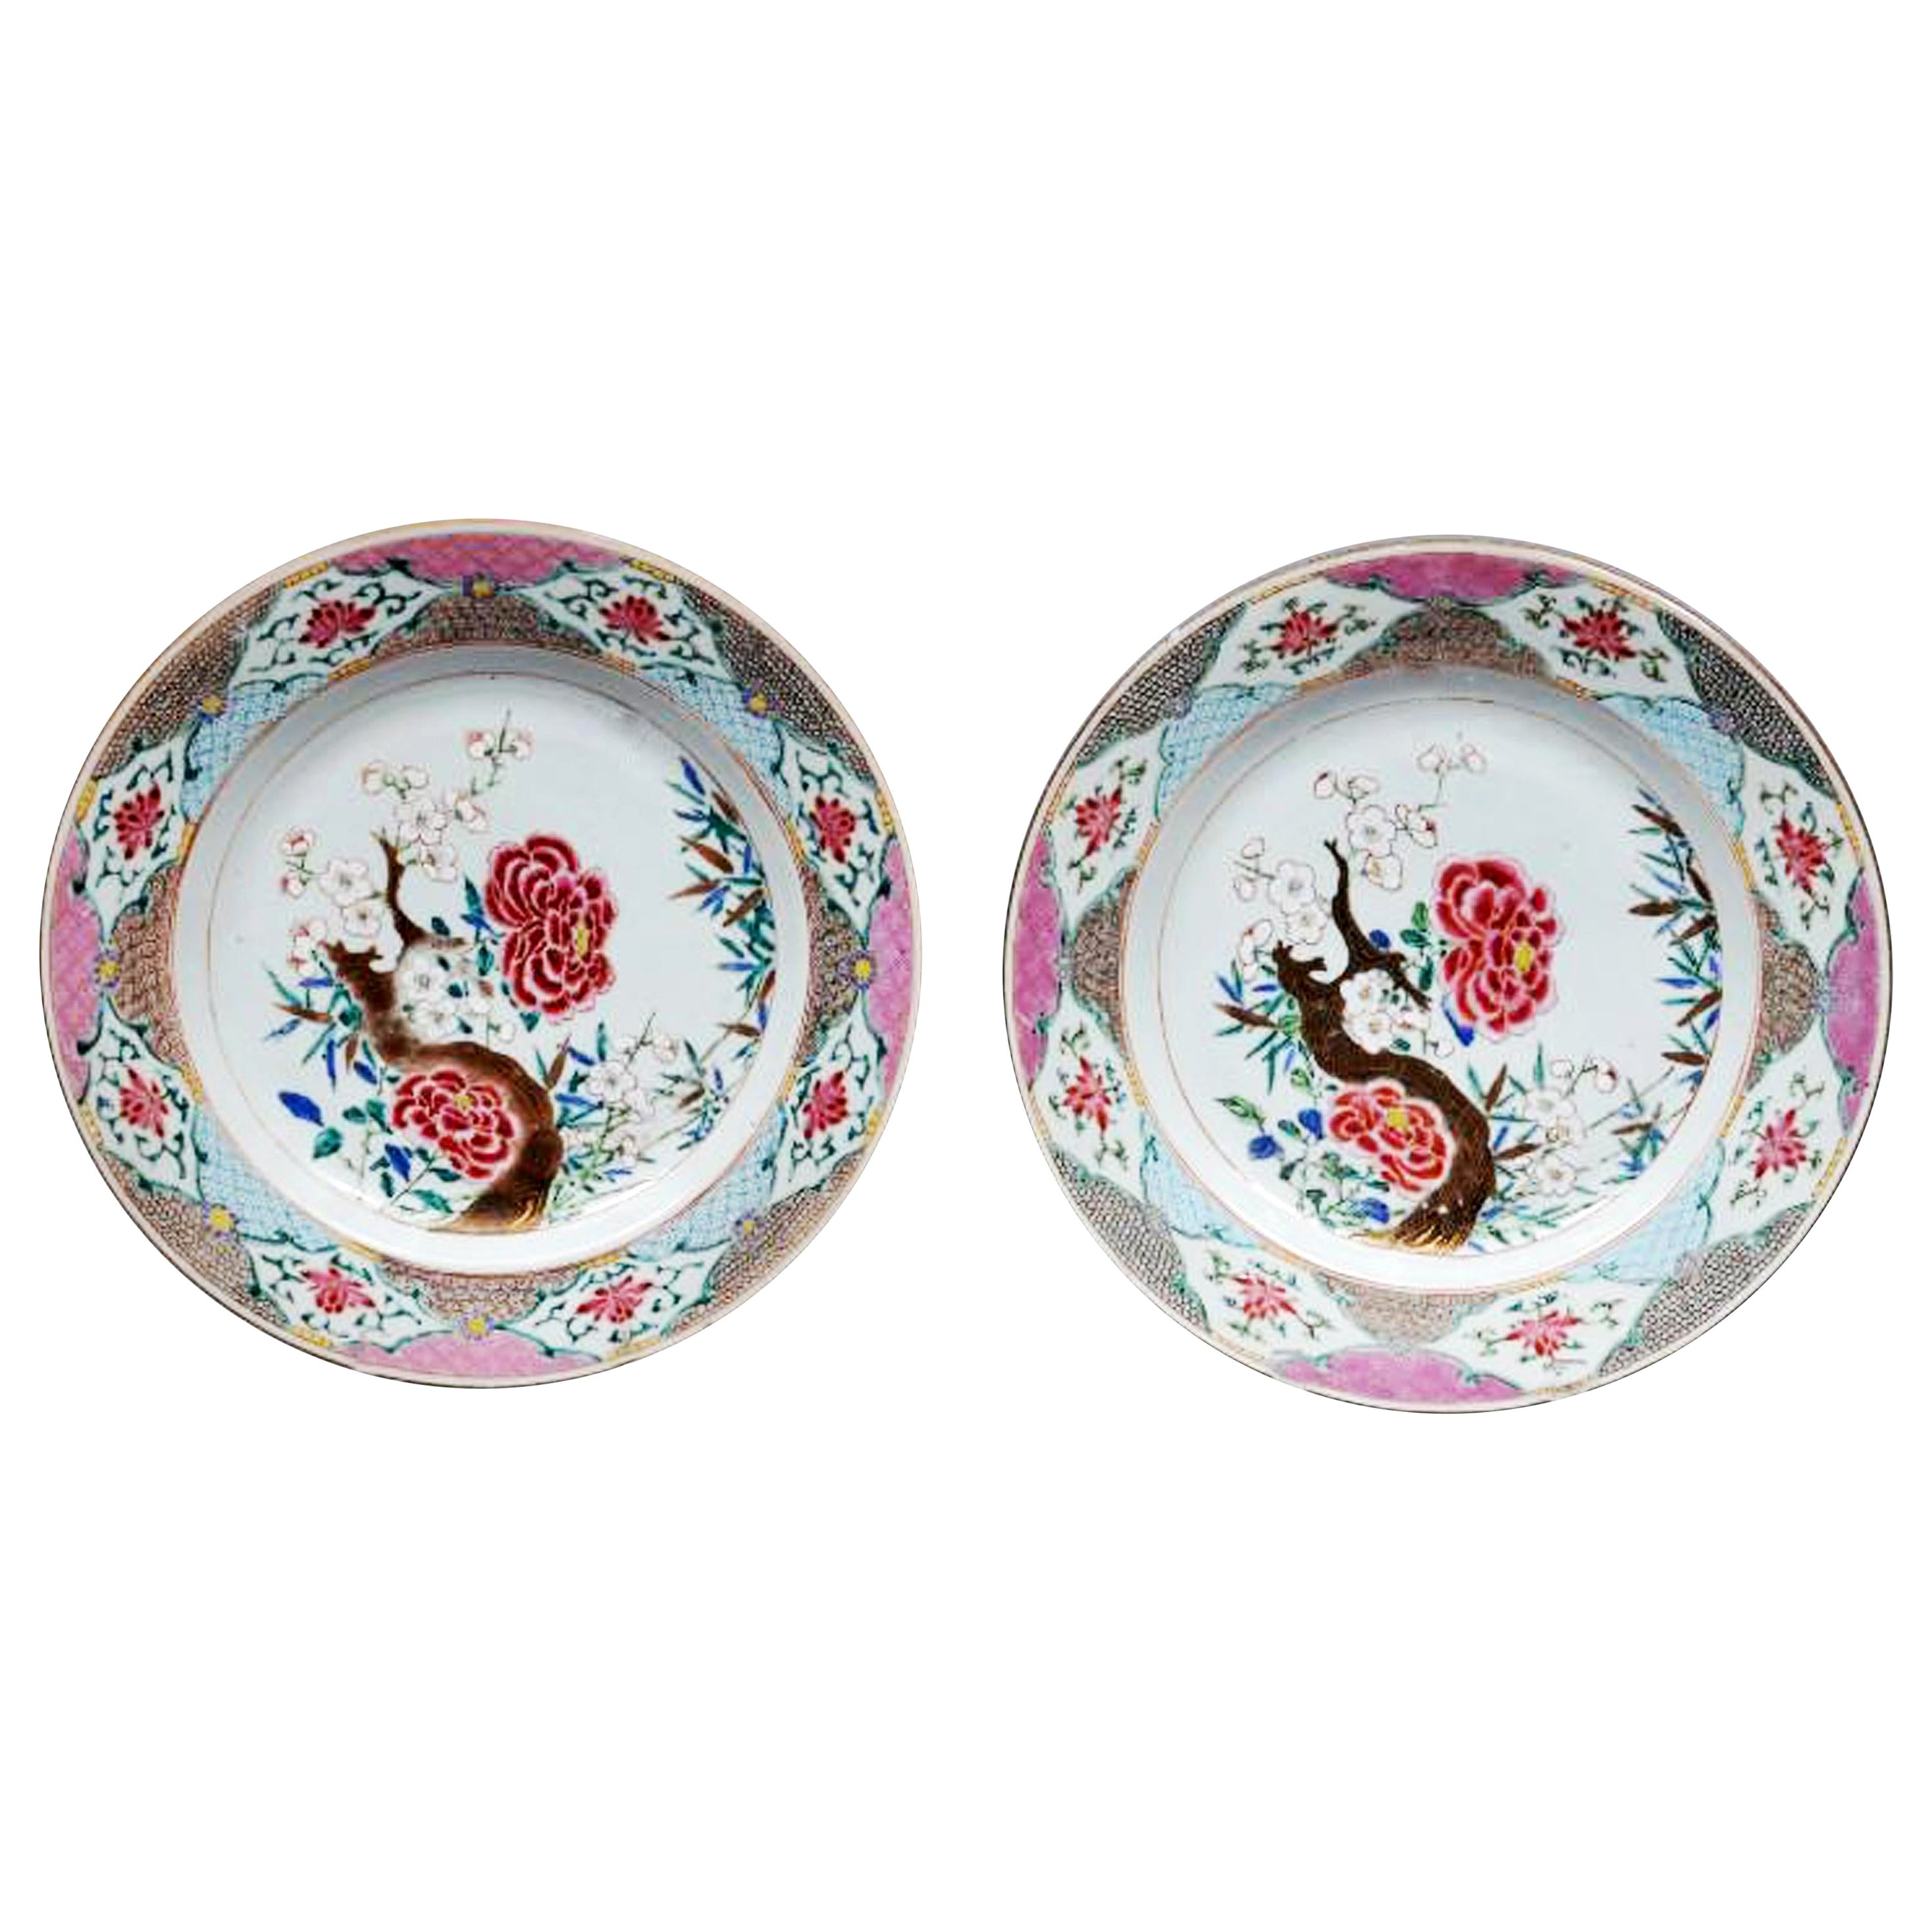 Chinese Export Famille Rose Porcelain Large Dishes, circa 1765-1775 For Sale